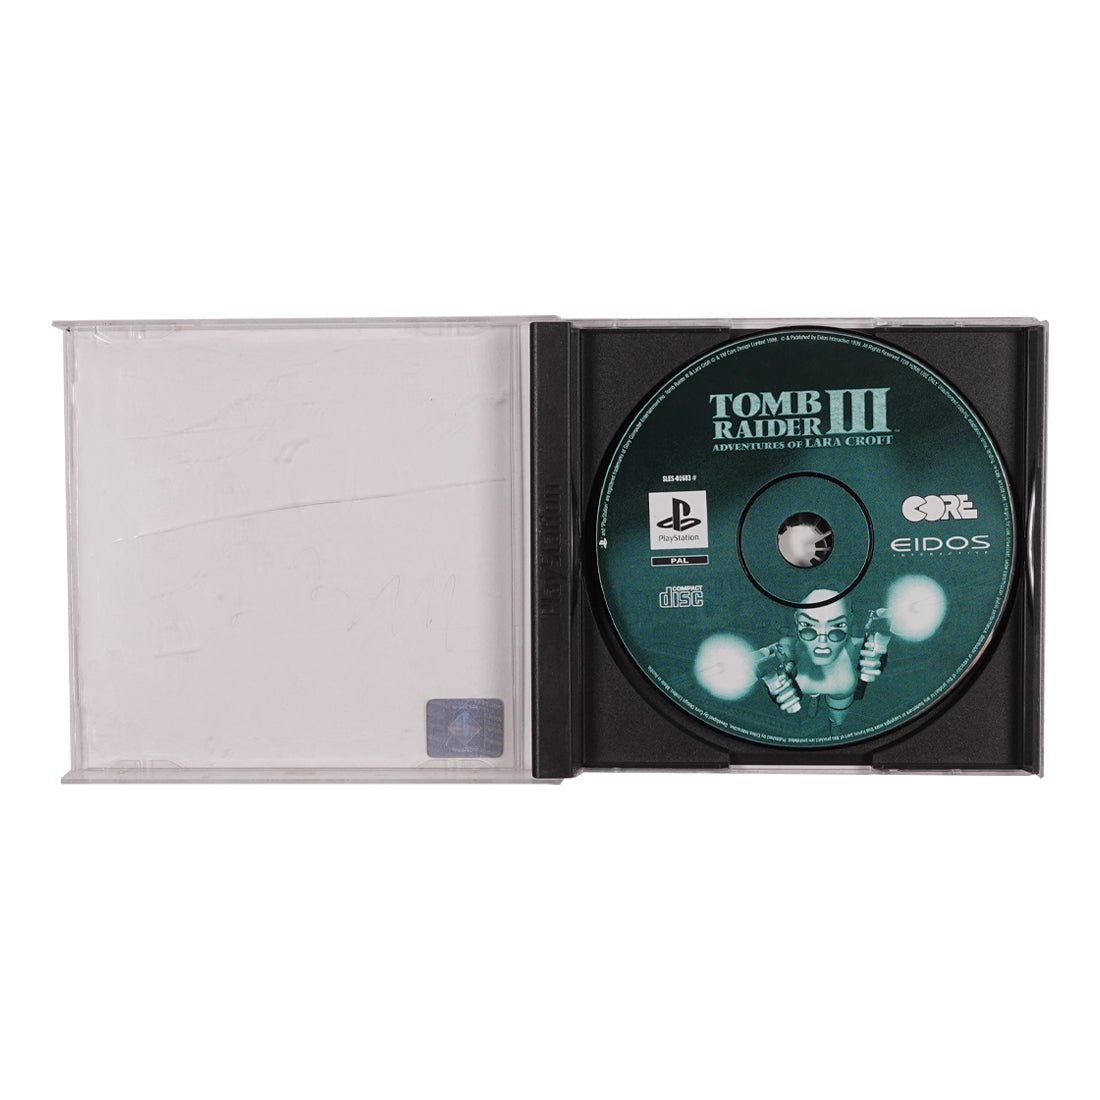 (Pre-Owned) Tomb Raider 3 - PlayStation 1 - Store 974 | ستور ٩٧٤